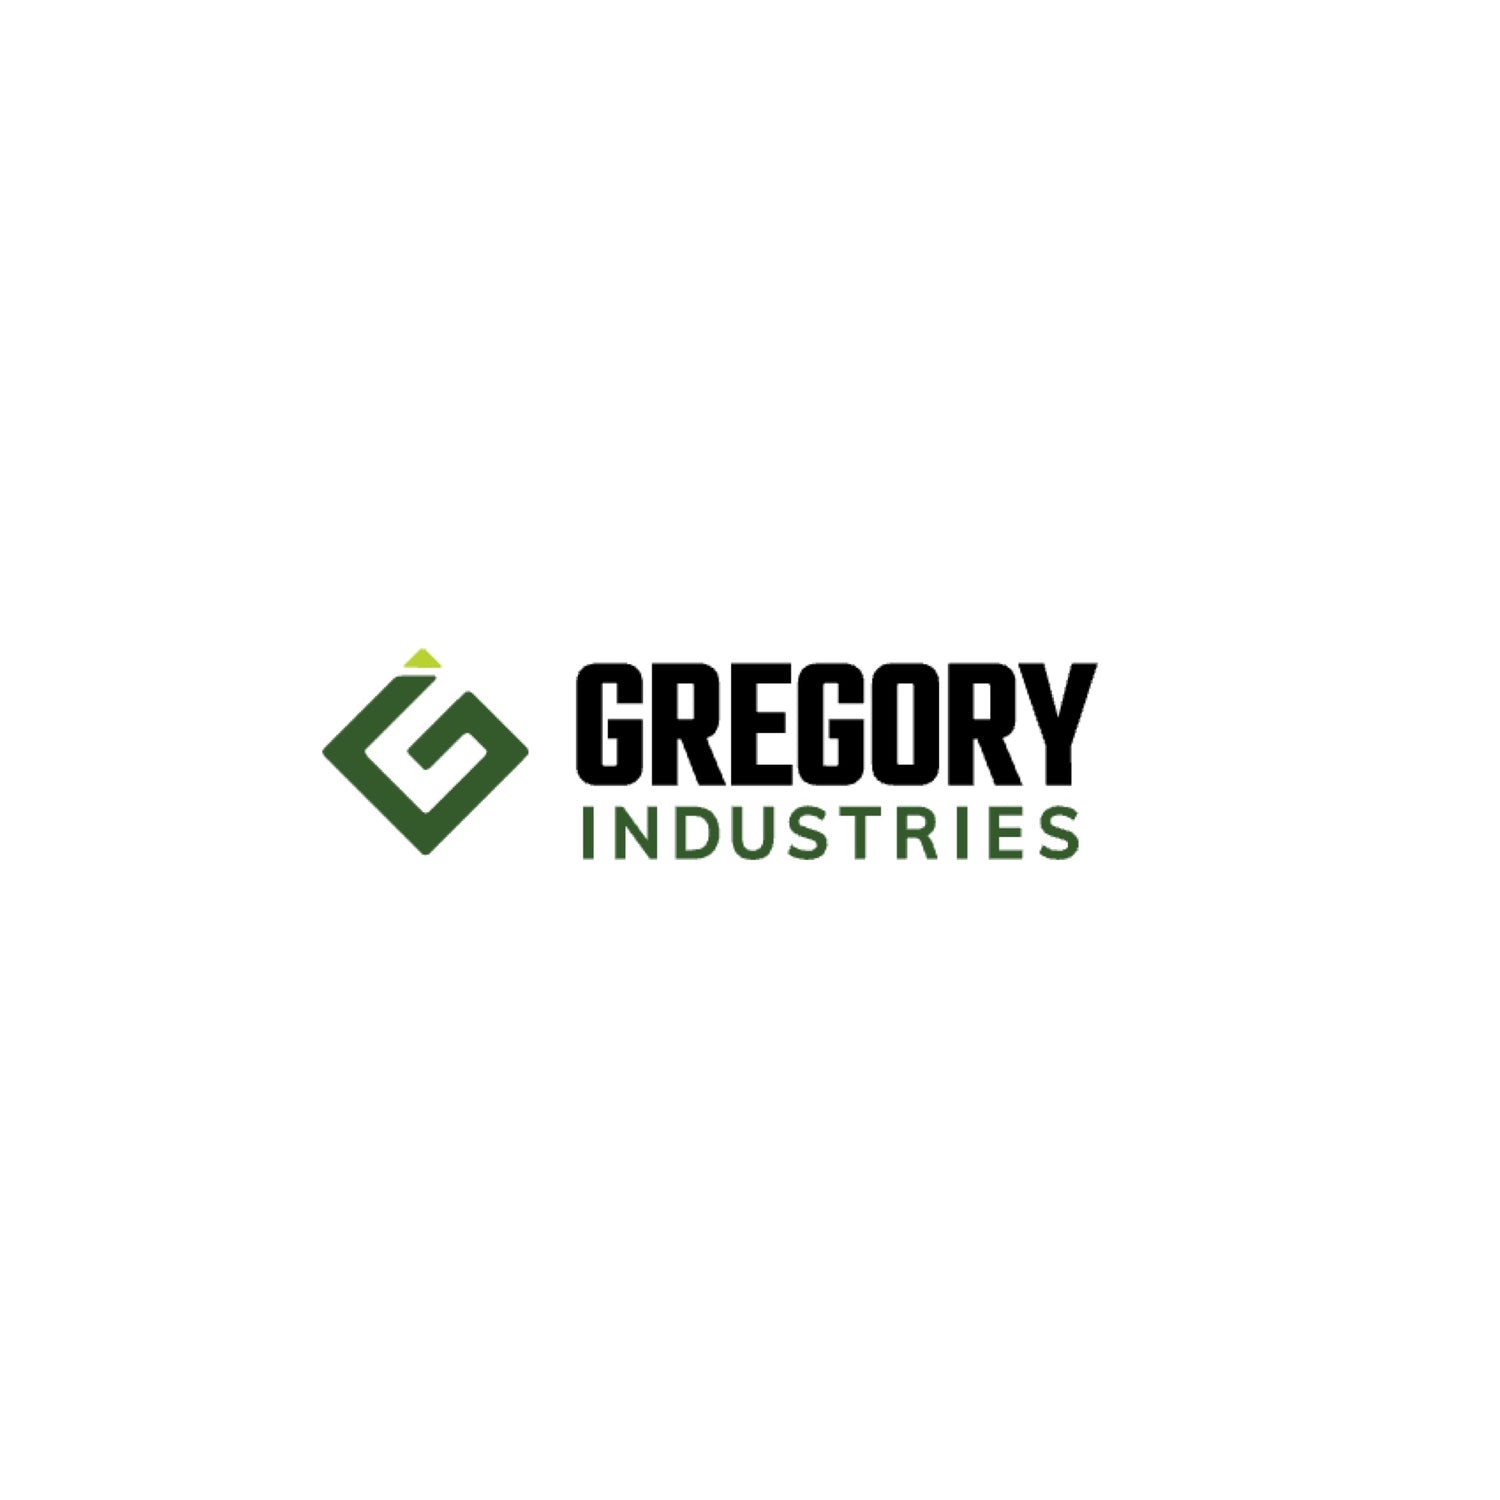 GREGORY INDUSTRIES INC.